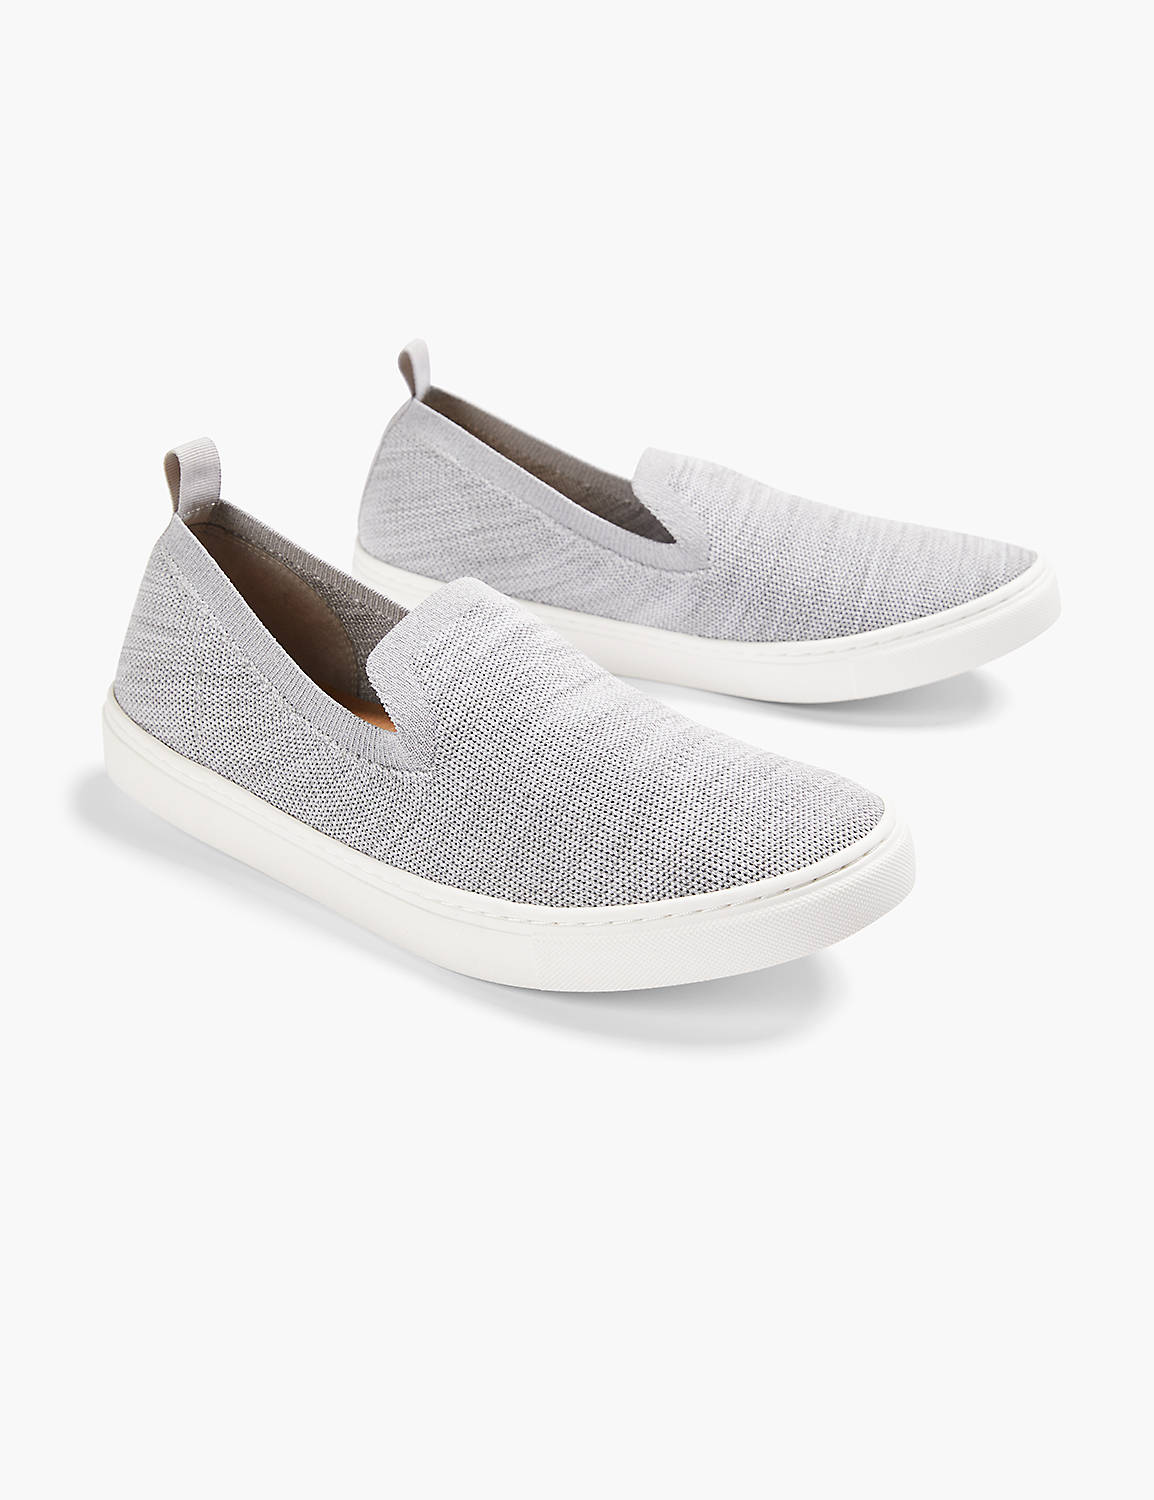 DREAM CLOUD STRETCH KNIT SLIP-ON SN Product Image 1